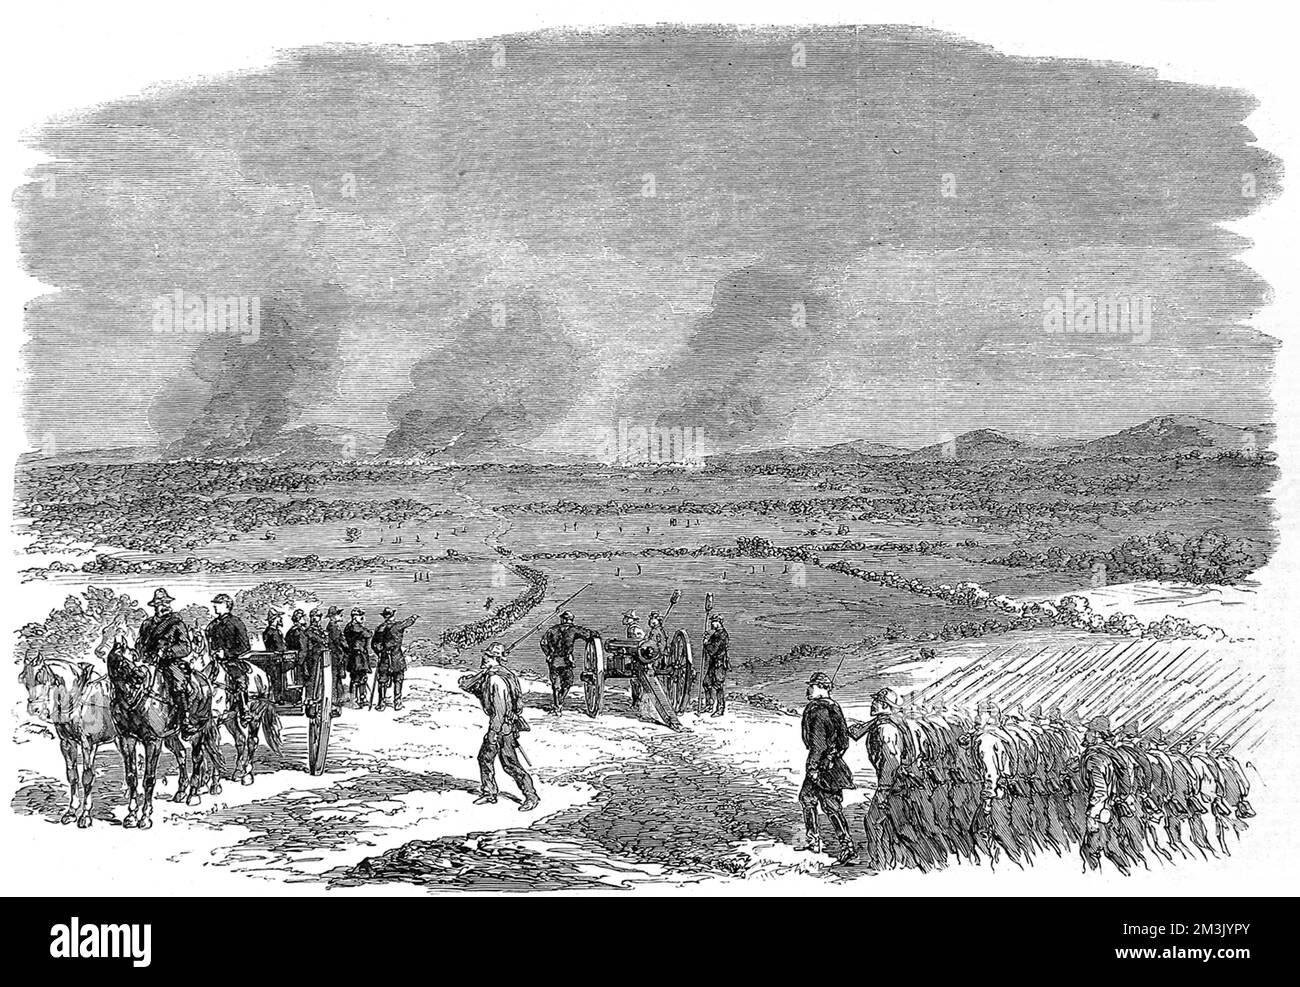 Illustration showing the march of Kershaw's and Fitz Lee's Confederate divisions up the valley of Virginia, to gather for the battle of Shanandoah Valley.  The battle was won by General Sheridan's Federal army.     Date: 1864 Stock Photo